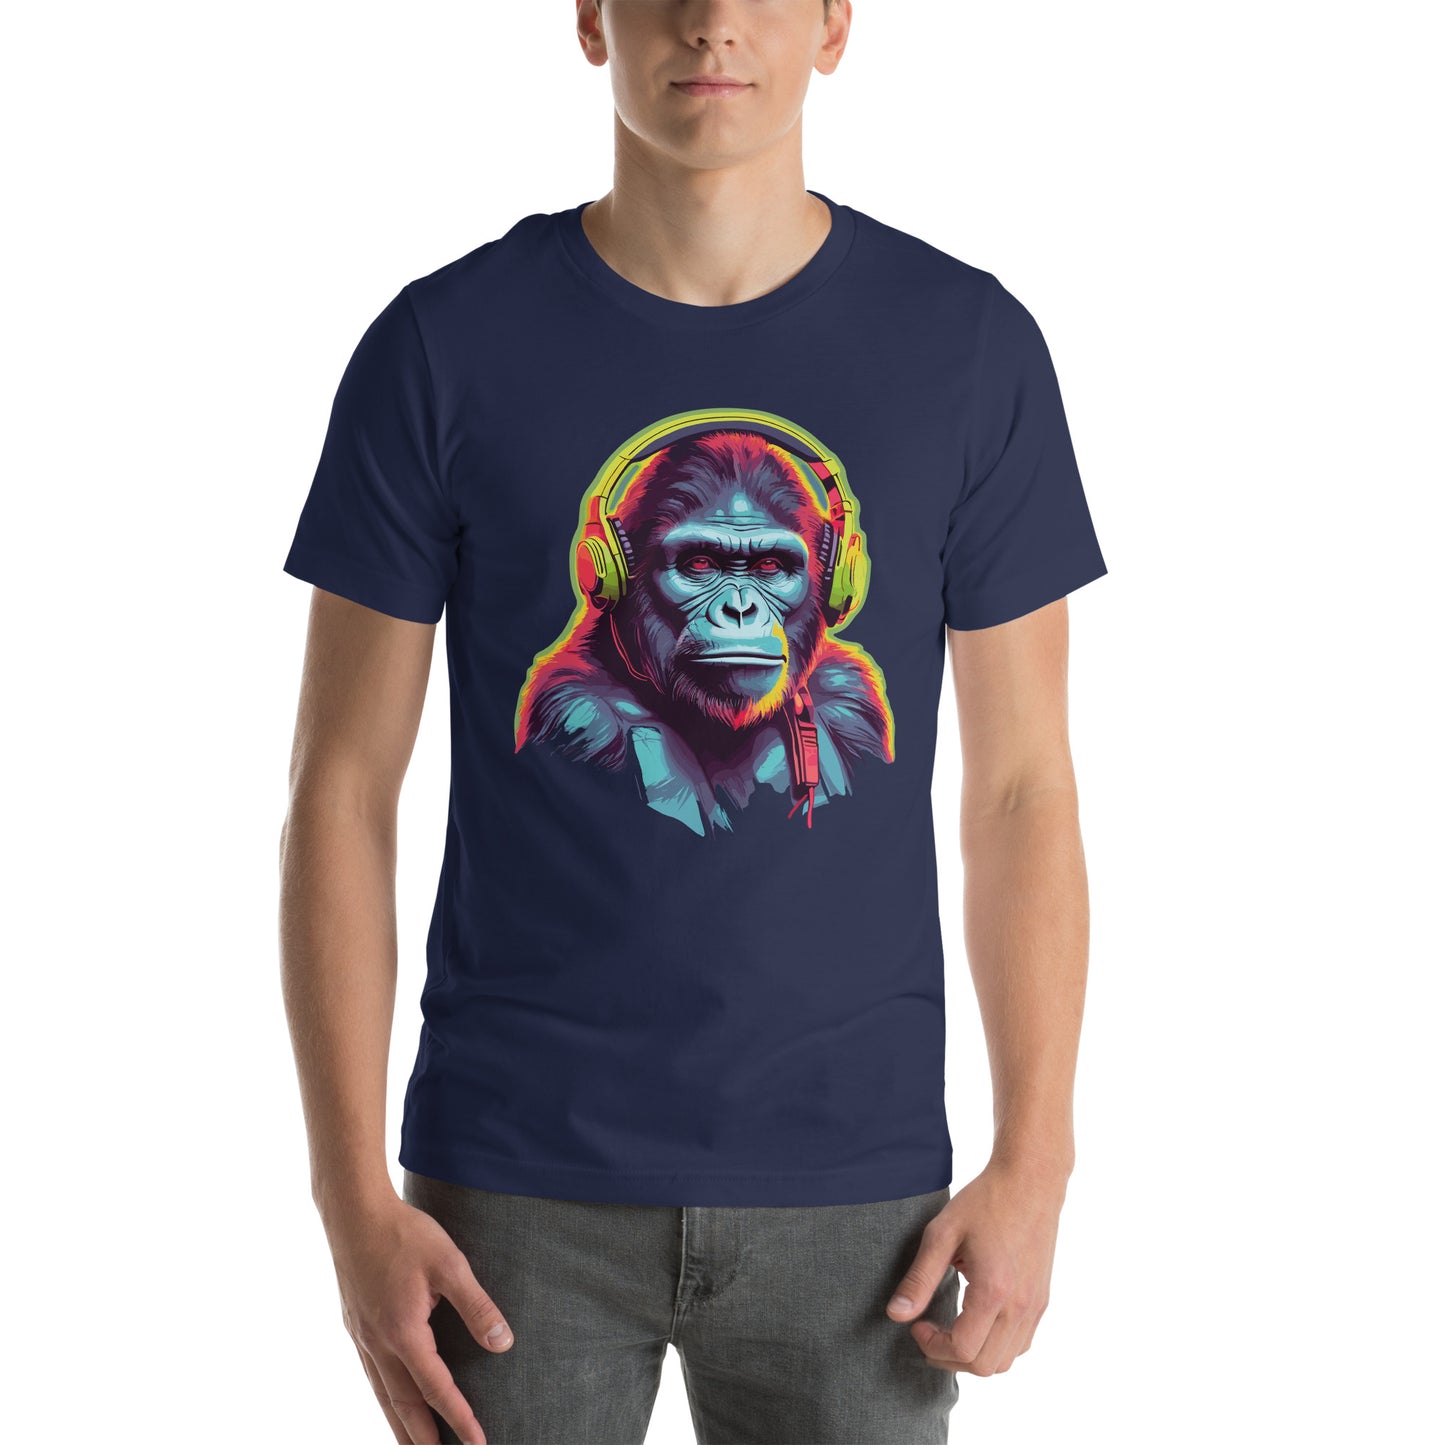 Navy T-Shirt featuring a fun ape with headphones design. Taken from the TEQNEON MUSIC BOX, NEOLIFIC & HA HA LAND collections